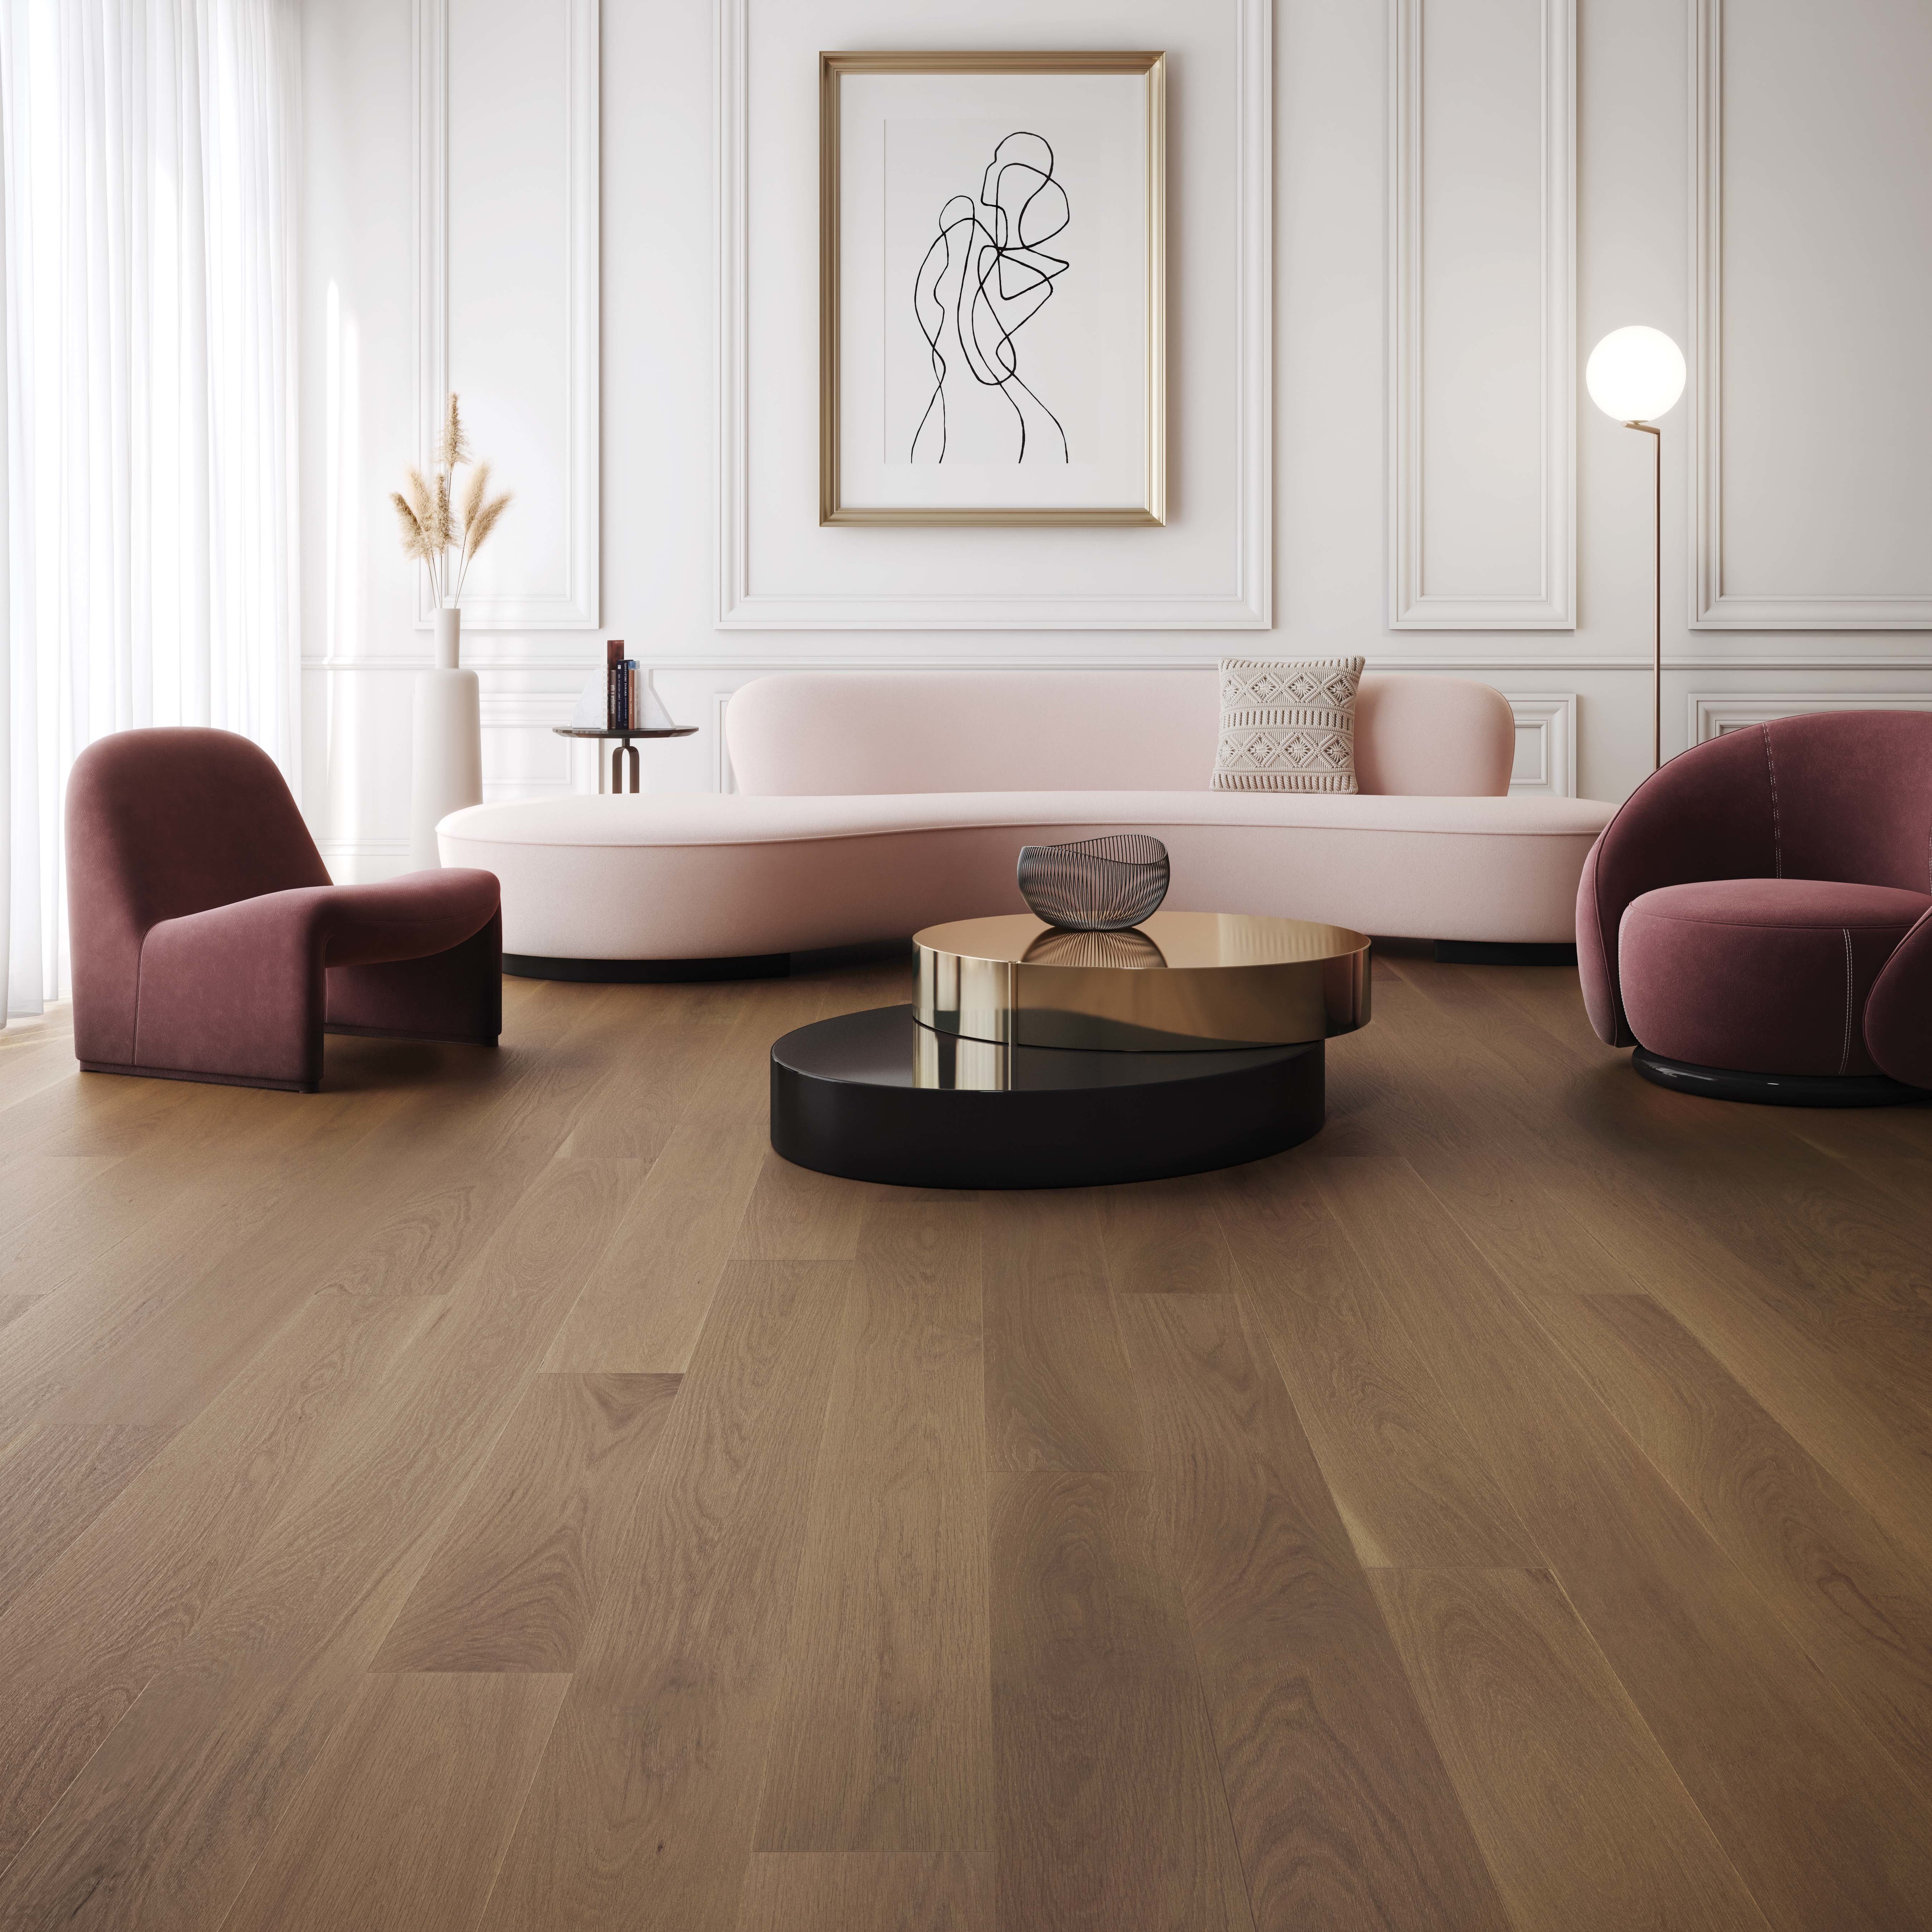 White Oak Hattie Exclusive Brushed - Ambience image